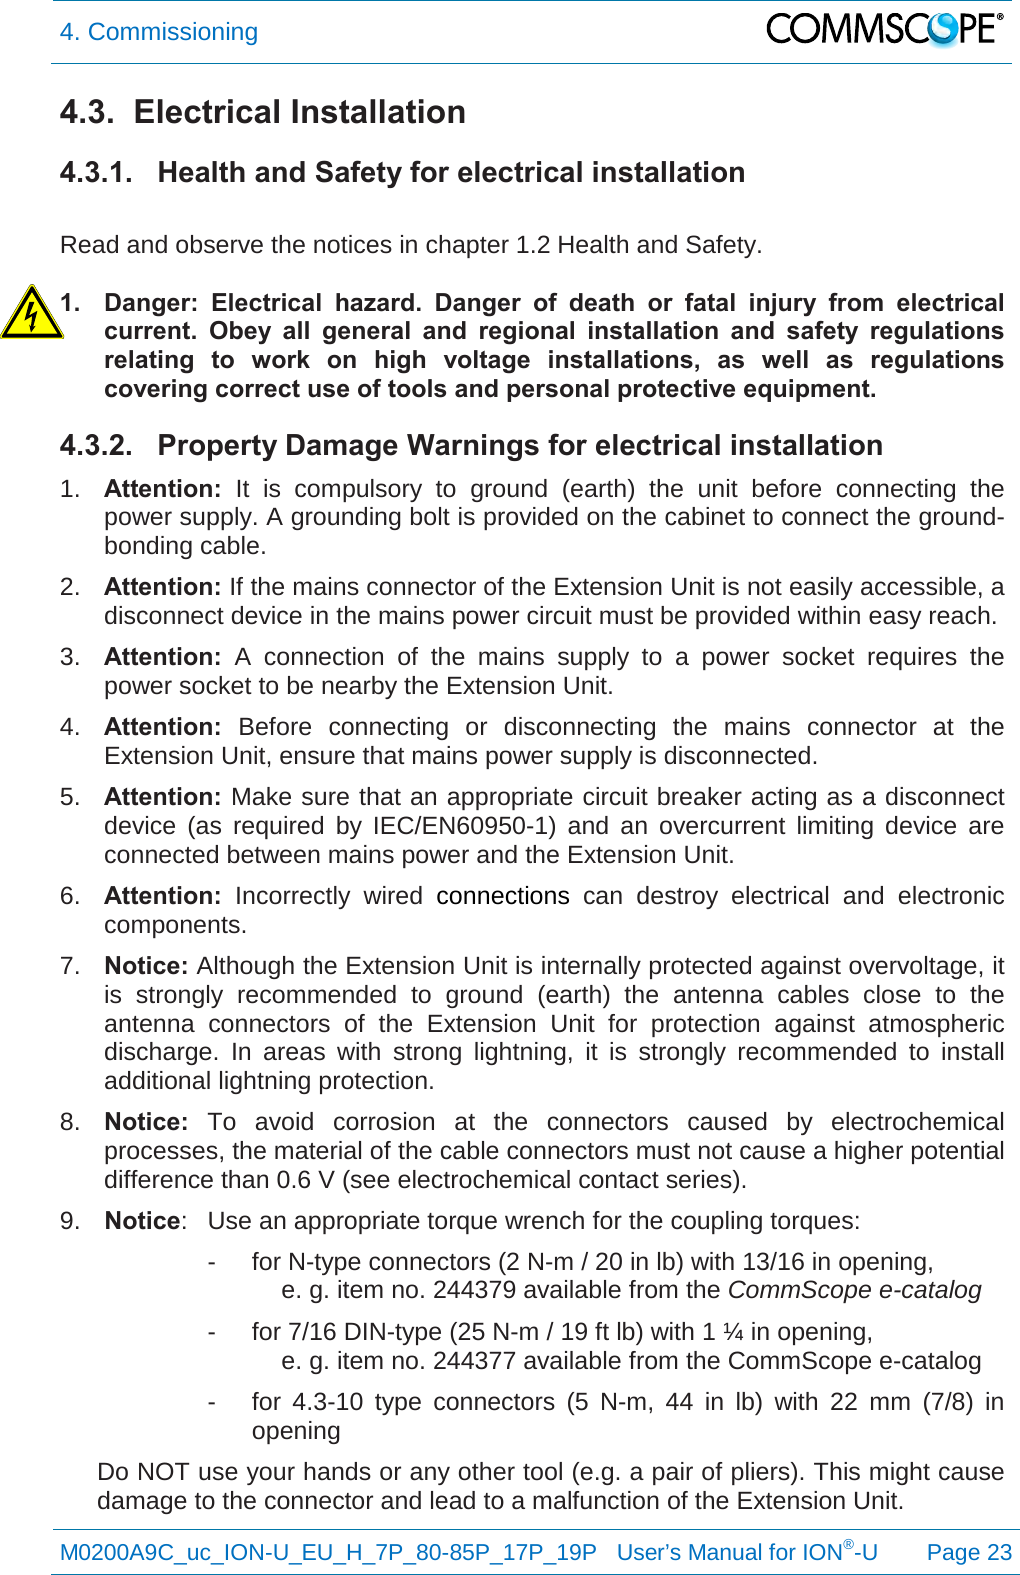 4. Commissioning   M0200A9C_uc_ION-U_EU_H_7P_80-85P_17P_19P   User’s Manual for ION®-U  Page 23  4.3.  Electrical Installation 4.3.1. Health and Safety for electrical installation  Read and observe the notices in chapter 1.2 Health and Safety.  1. Danger: Electrical hazard. Danger of death or fatal injury from electrical current. Obey all general and regional installation and safety regulations relating to work on high voltage installations, as well as regulations covering correct use of tools and personal protective equipment. 4.3.2. Property Damage Warnings for electrical installation 1. Attention: It is compulsory to ground (earth) the unit before connecting the power supply. A grounding bolt is provided on the cabinet to connect the ground-bonding cable. 2. Attention: If the mains connector of the Extension Unit is not easily accessible, a disconnect device in the mains power circuit must be provided within easy reach. 3. Attention: A connection of the mains supply to a power socket requires the power socket to be nearby the Extension Unit. 4. Attention:  Before connecting or disconnecting the mains connector at the Extension Unit, ensure that mains power supply is disconnected. 5. Attention: Make sure that an appropriate circuit breaker acting as a disconnect device (as required by IEC/EN60950-1) and an overcurrent limiting device are connected between mains power and the Extension Unit. 6. Attention: Incorrectly wired connections can destroy electrical and electronic components. 7. Notice: Although the Extension Unit is internally protected against overvoltage, it is strongly recommended to ground (earth) the antenna cables close to the antenna connectors of the Extension  Unit for protection against atmospheric discharge. In areas with strong lightning, it is strongly recommended to install additional lightning protection. 8. Notice: To avoid corrosion at the connectors caused by electrochemical processes, the material of the cable connectors must not cause a higher potential difference than 0.6 V (see electrochemical contact series). 9. Notice:  Use an appropriate torque wrench for the coupling torques:   -  for N-type connectors (2 N-m / 20 in lb) with 13/16 in opening,  e. g. item no. 244379 available from the CommScope e-catalog -  for 7/16 DIN-type (25 N-m / 19 ft lb) with 1 ¼ in opening,  e. g. item no. 244377 available from the CommScope e-catalog -  for 4.3-10 type connectors (5 N-m, 44 in lb) with 22 mm (7/8)  in opening Do NOT use your hands or any other tool (e.g. a pair of pliers). This might cause damage to the connector and lead to a malfunction of the Extension Unit. 